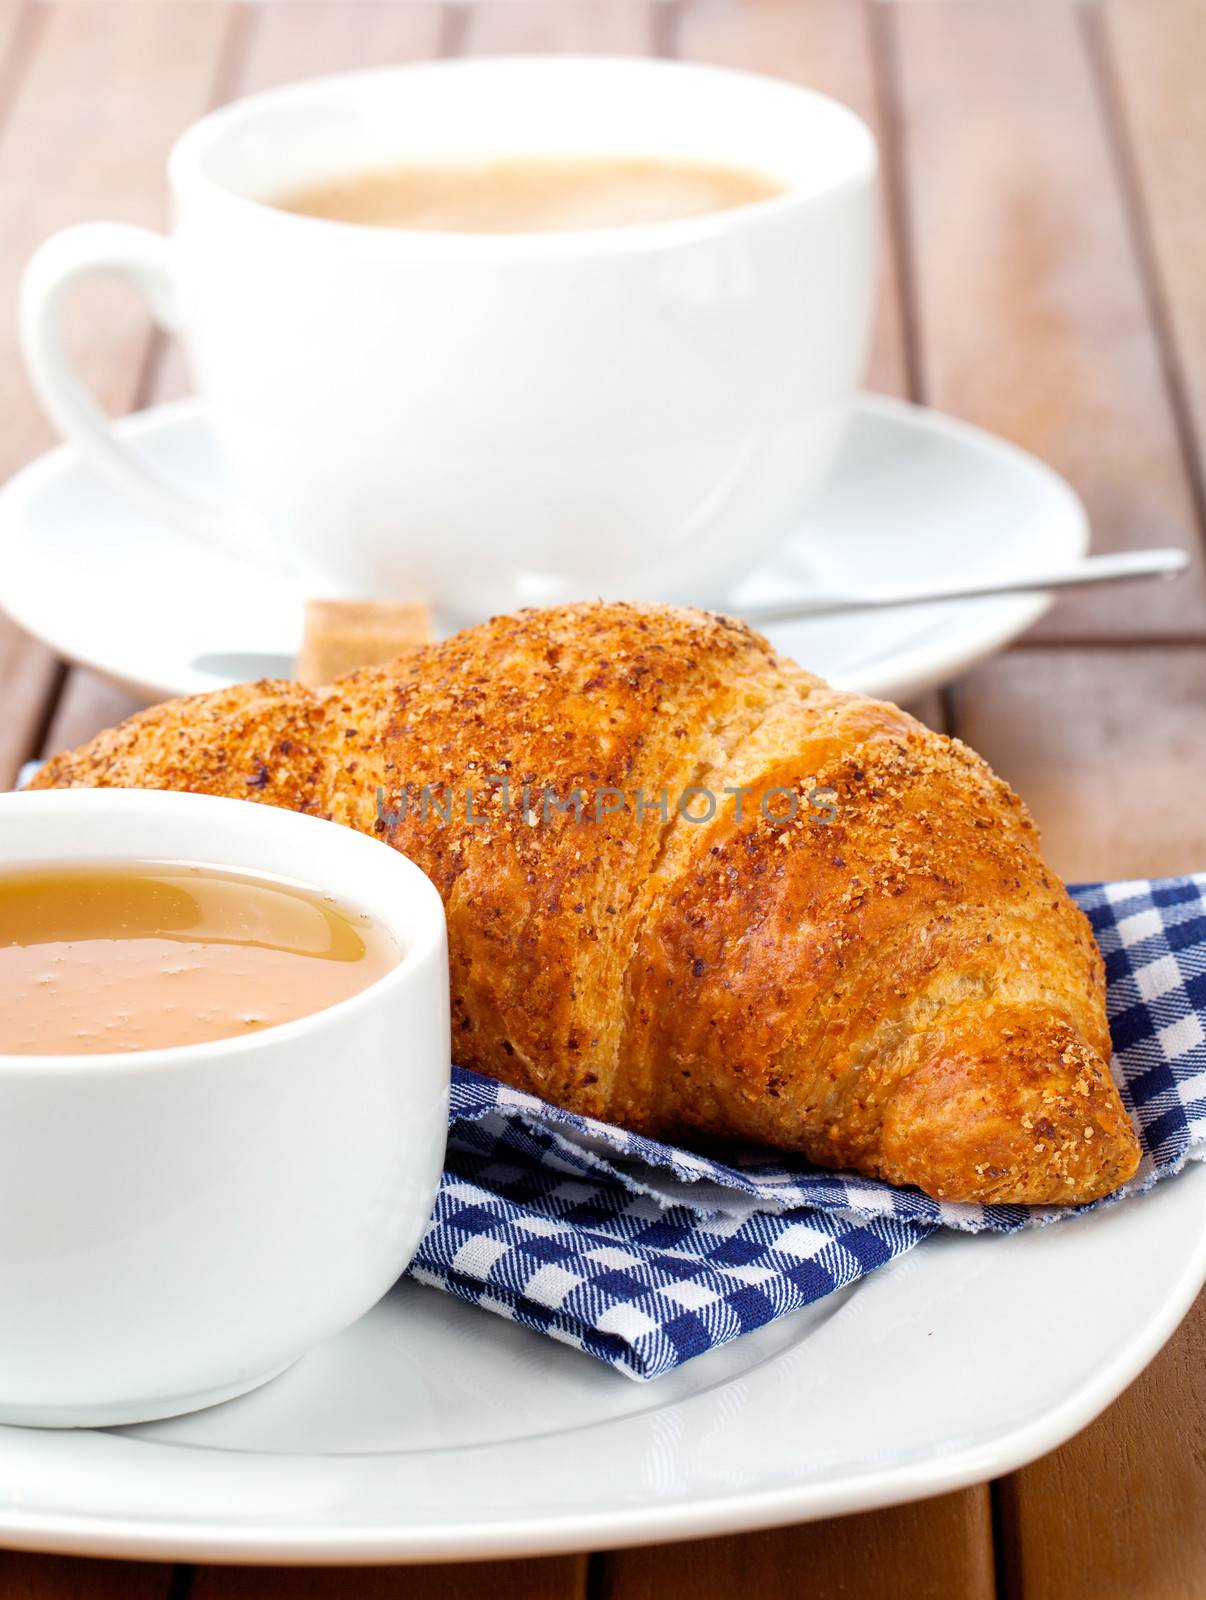 Croissant with marmalade  and caffee cup. on wooden backgroun